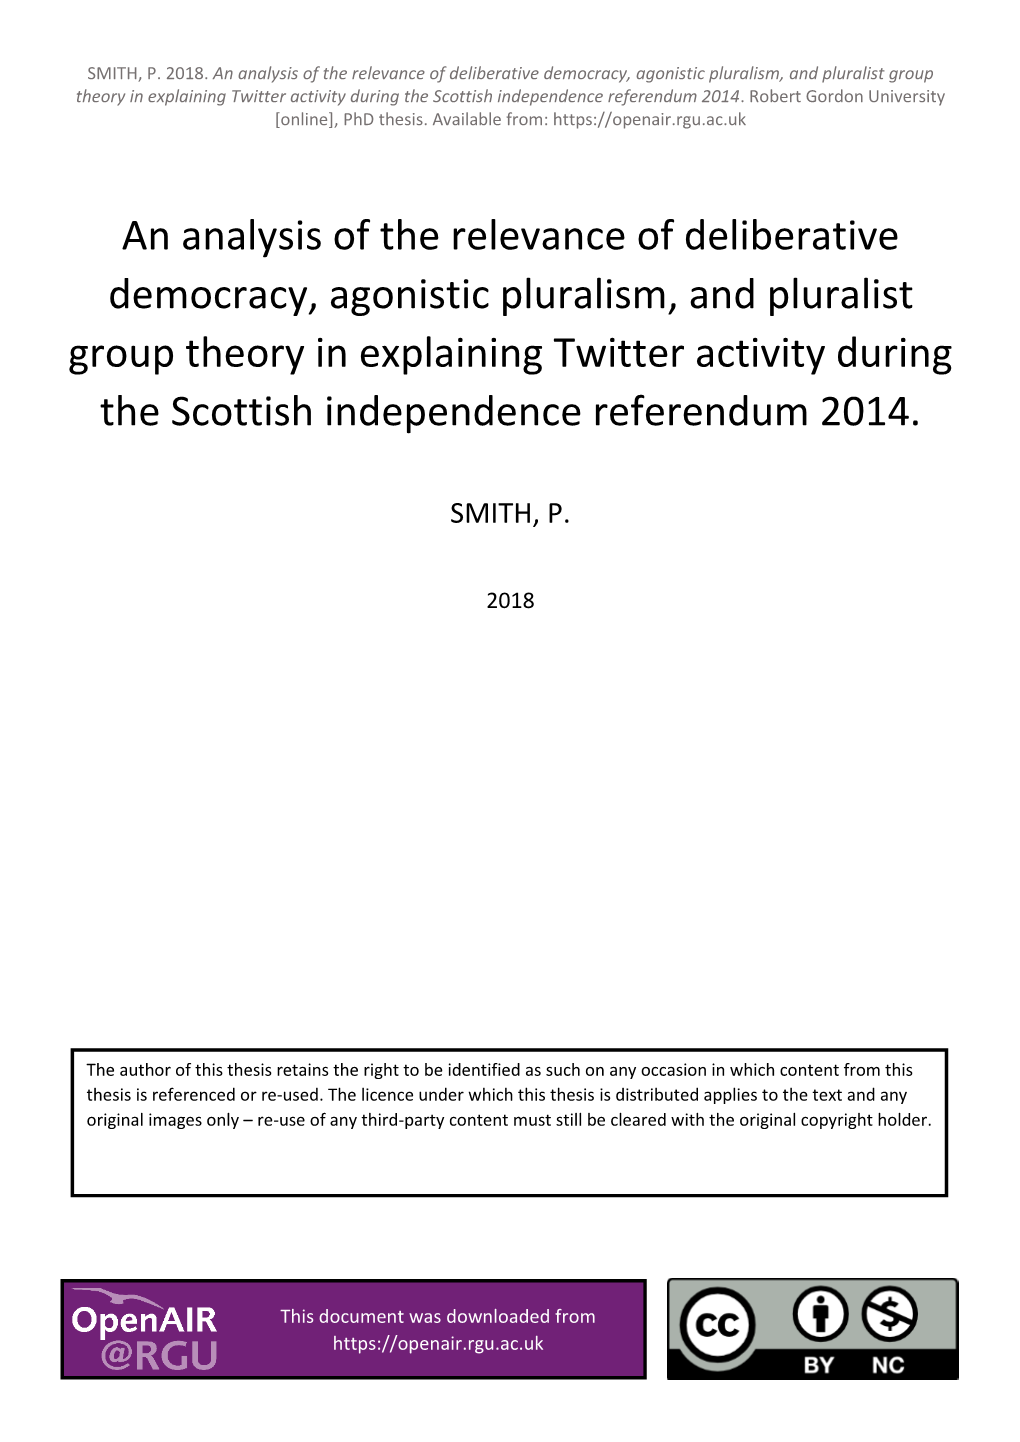 An Analysis of the Relevance of Deliberative Democracy, Agonistic